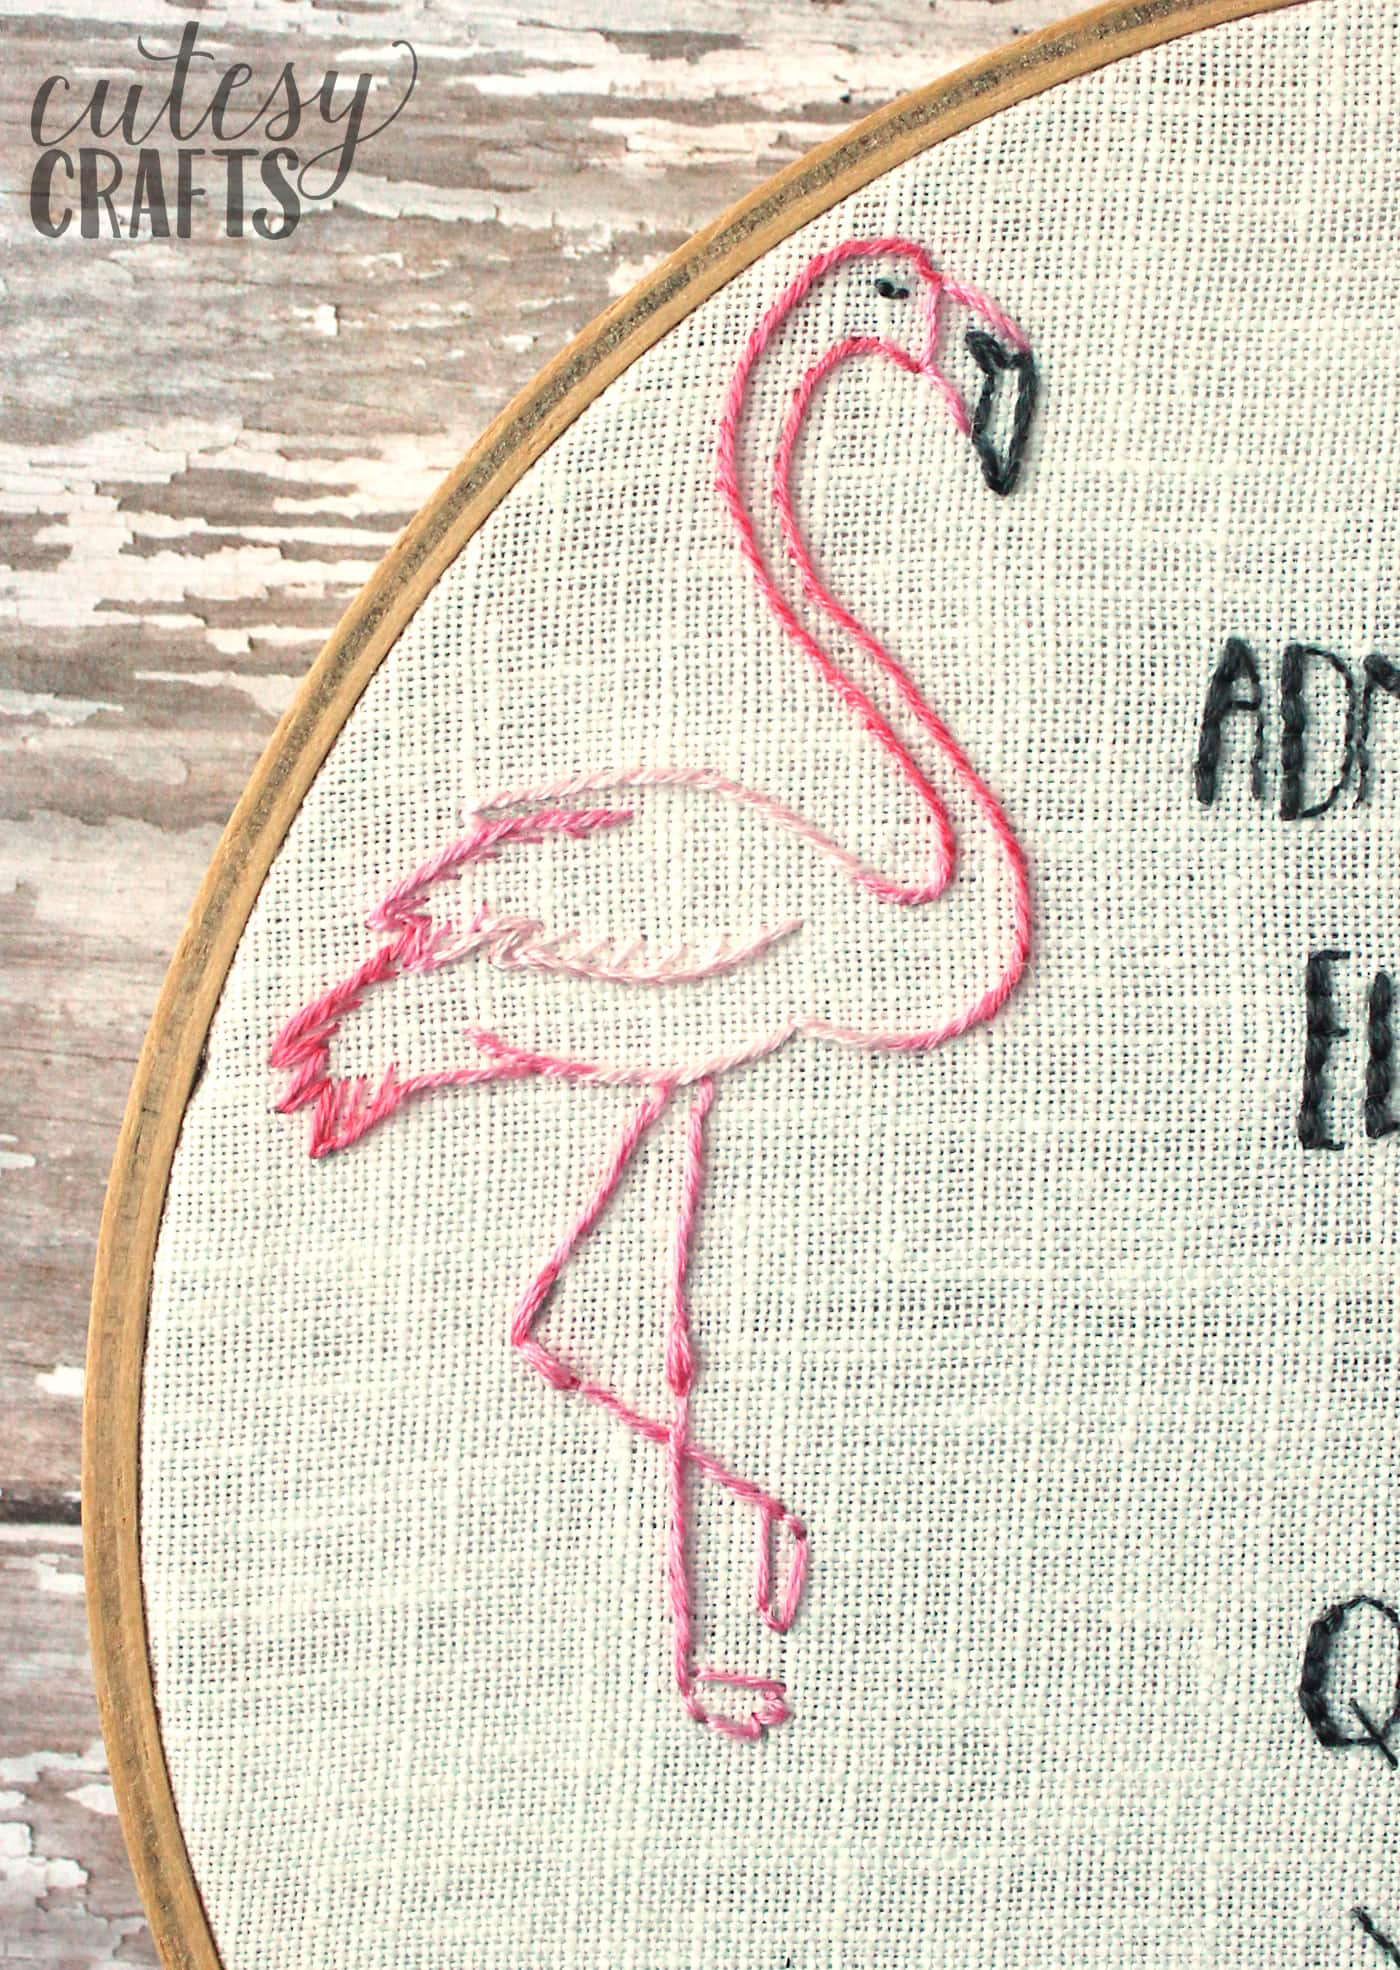 Peacock Embroidery Patterns Flamingo And Peacock Free Embroidery Pattern The Polka Dot Chair